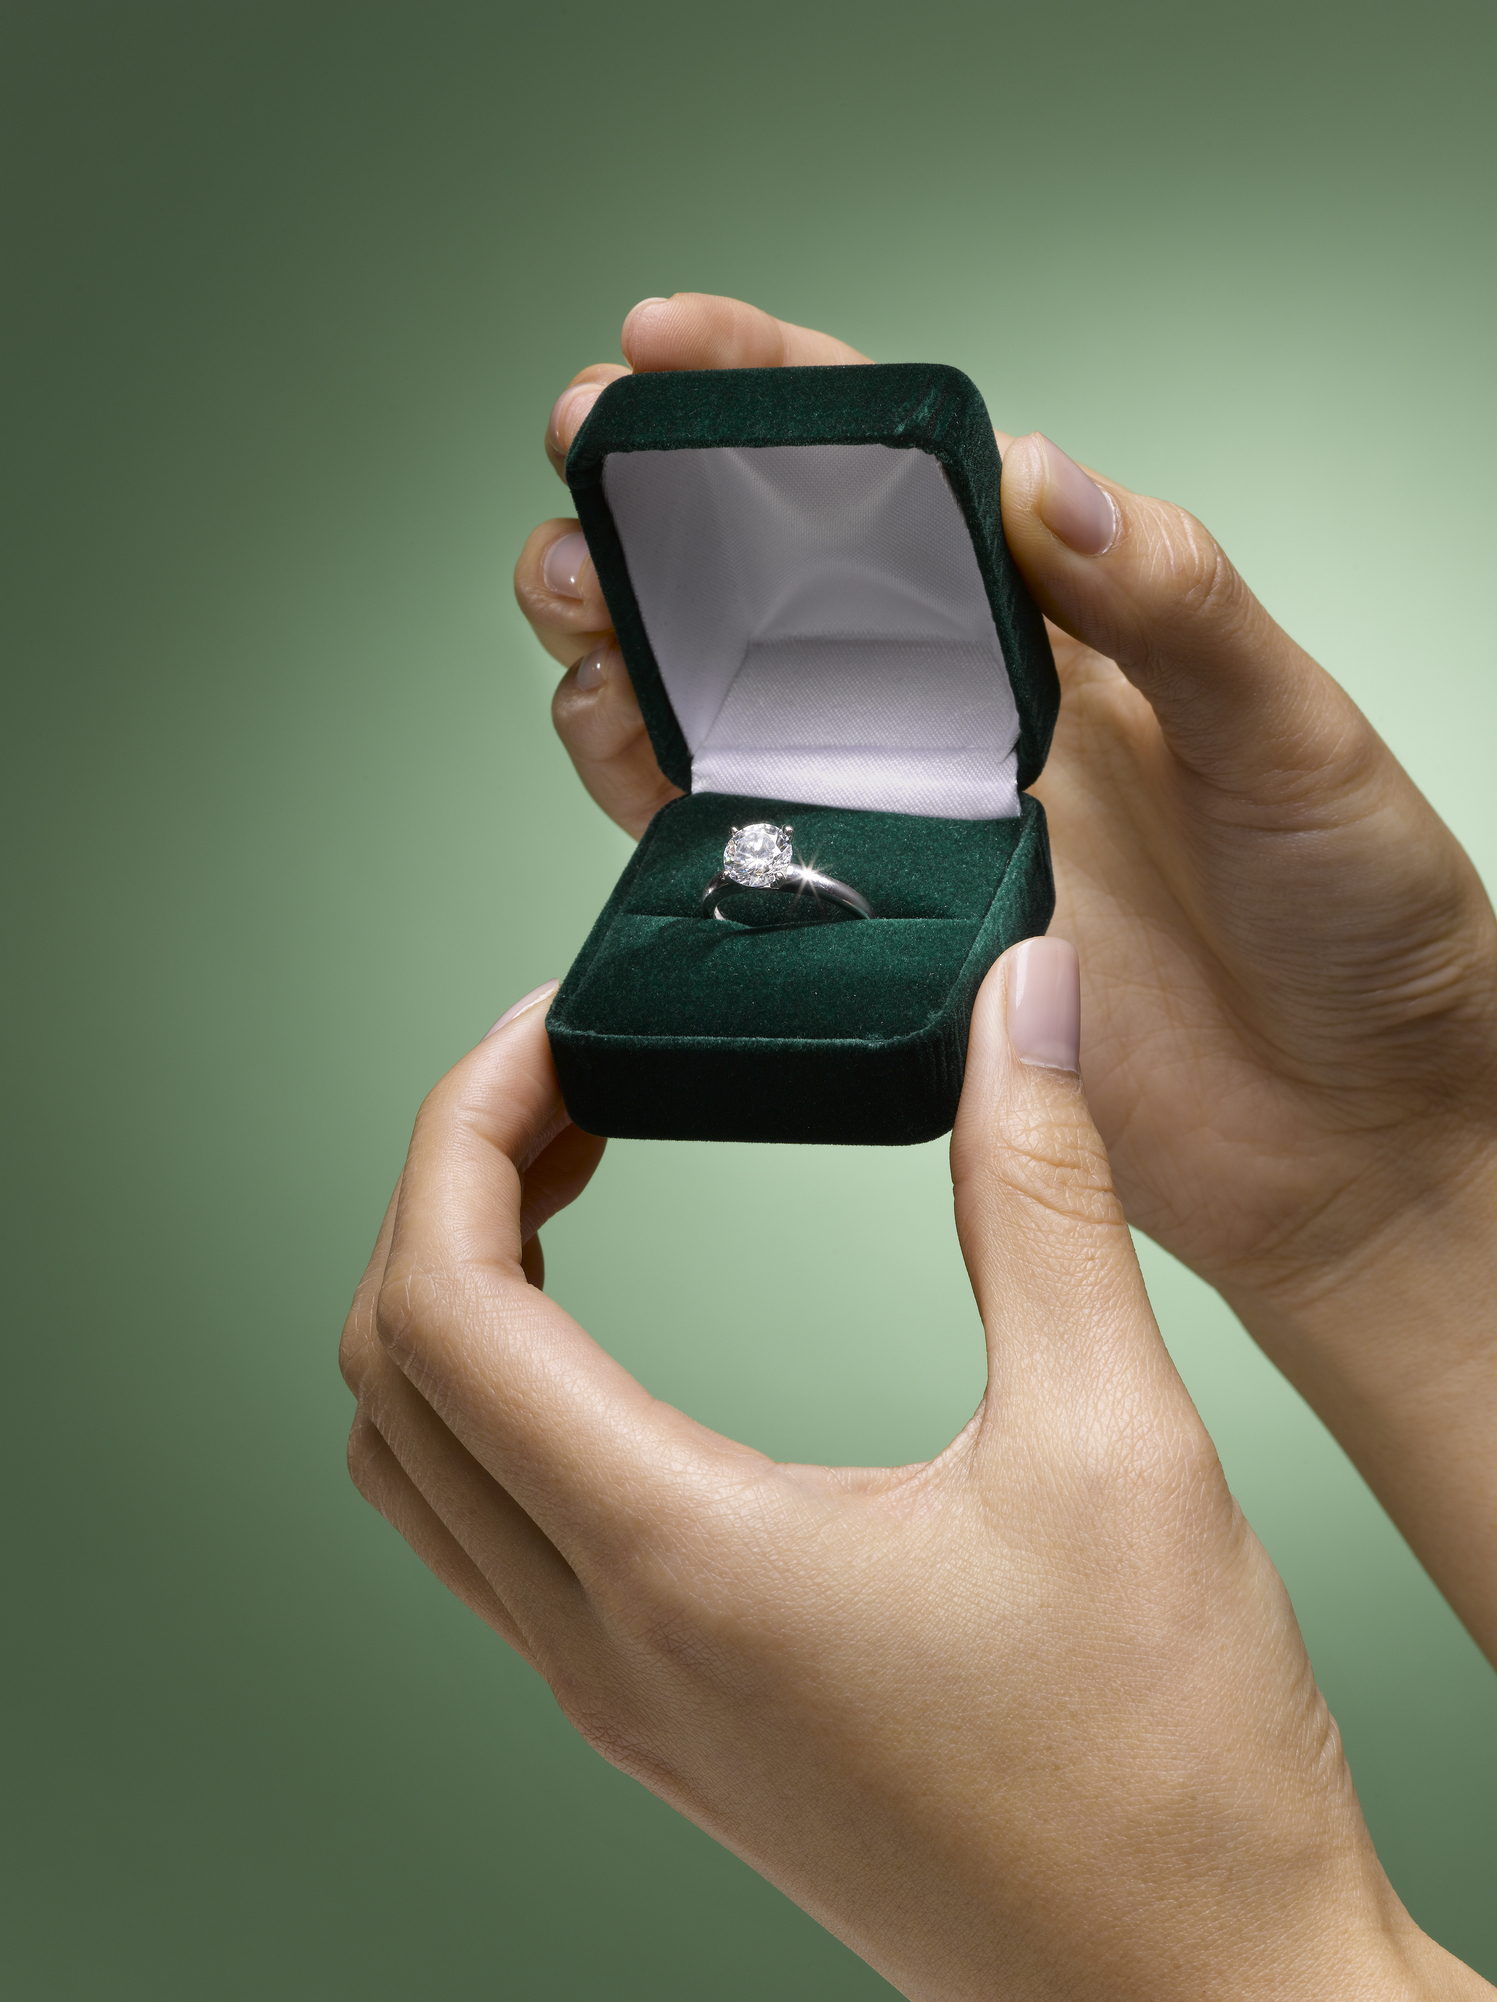 Hands presenting an open ring box with a diamond ring, suggesting a proposal or gift